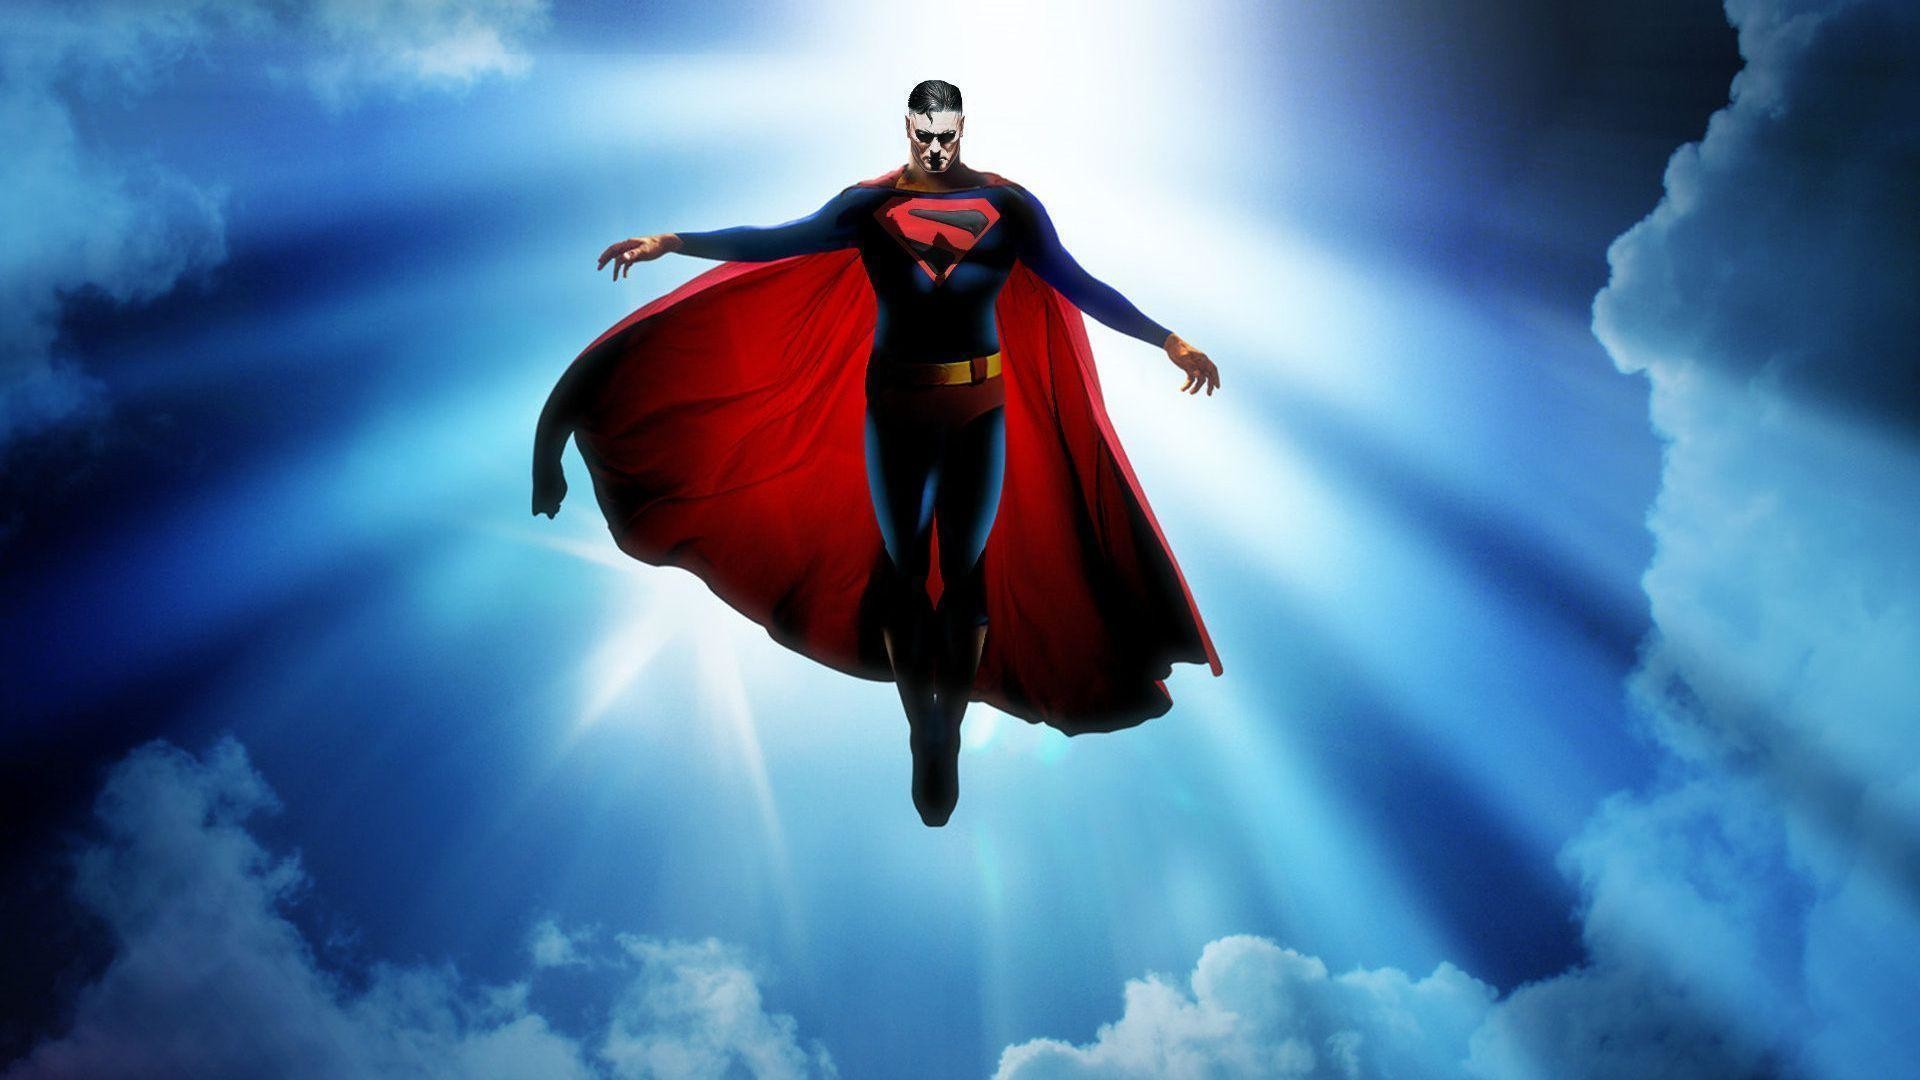 1920x1080 Cool Superman Wallpaper - Viewing Gallery